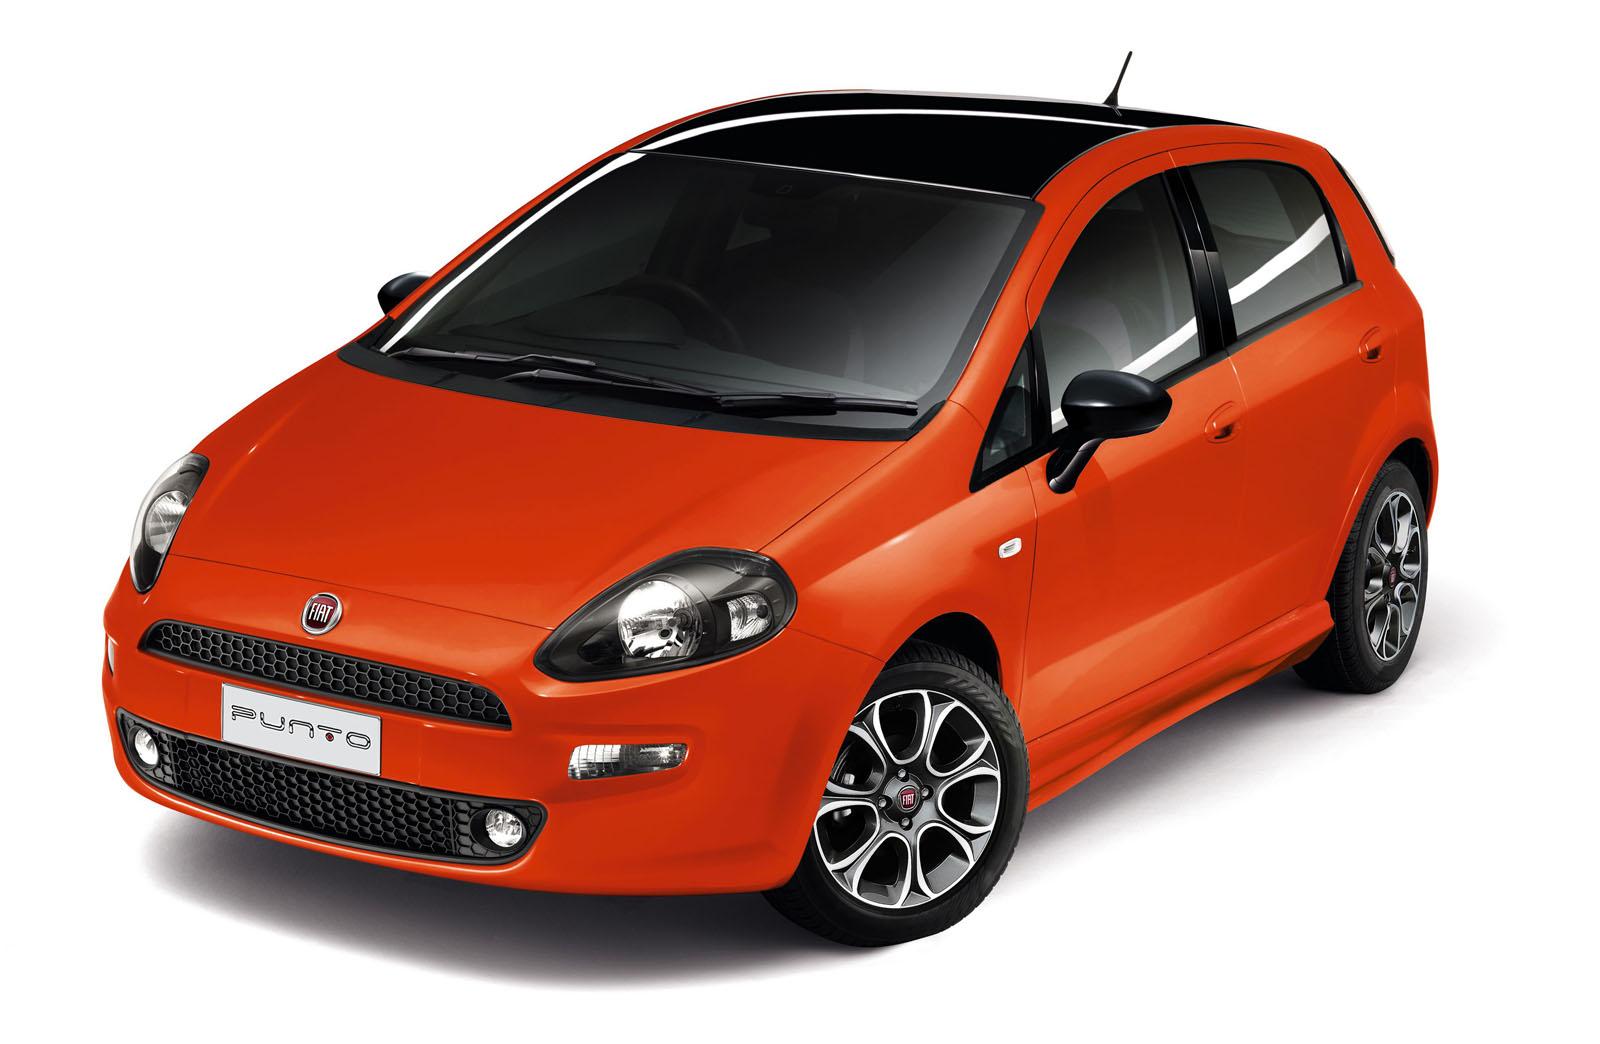 Fiat Punto Sporting Variant Updates Launched In The Uk